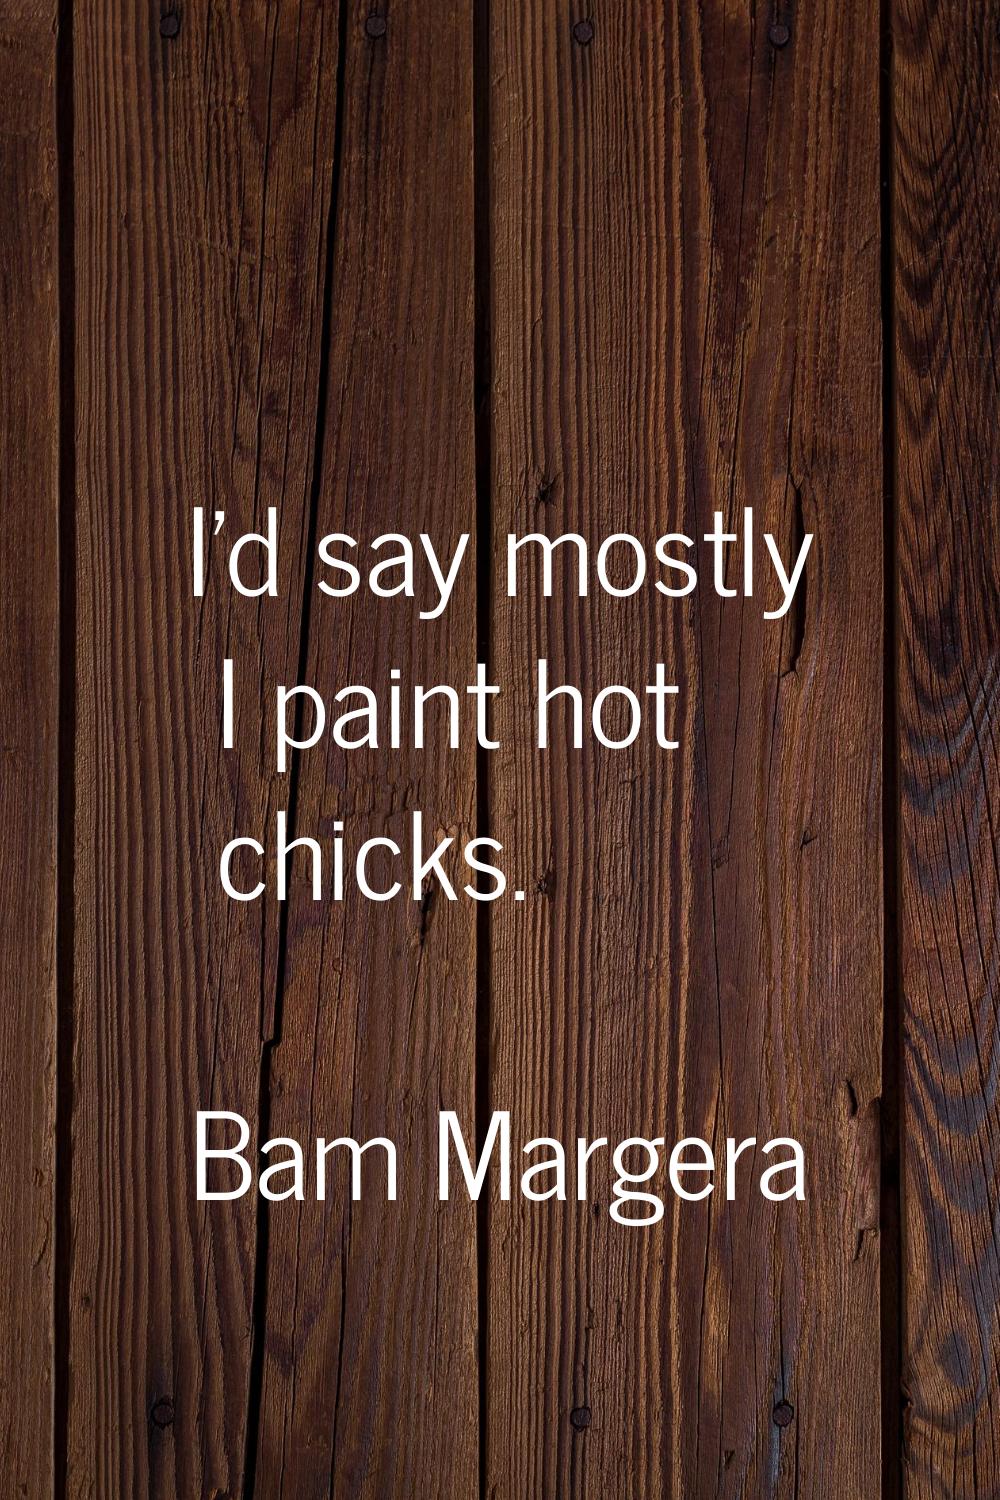 I'd say mostly I paint hot chicks.